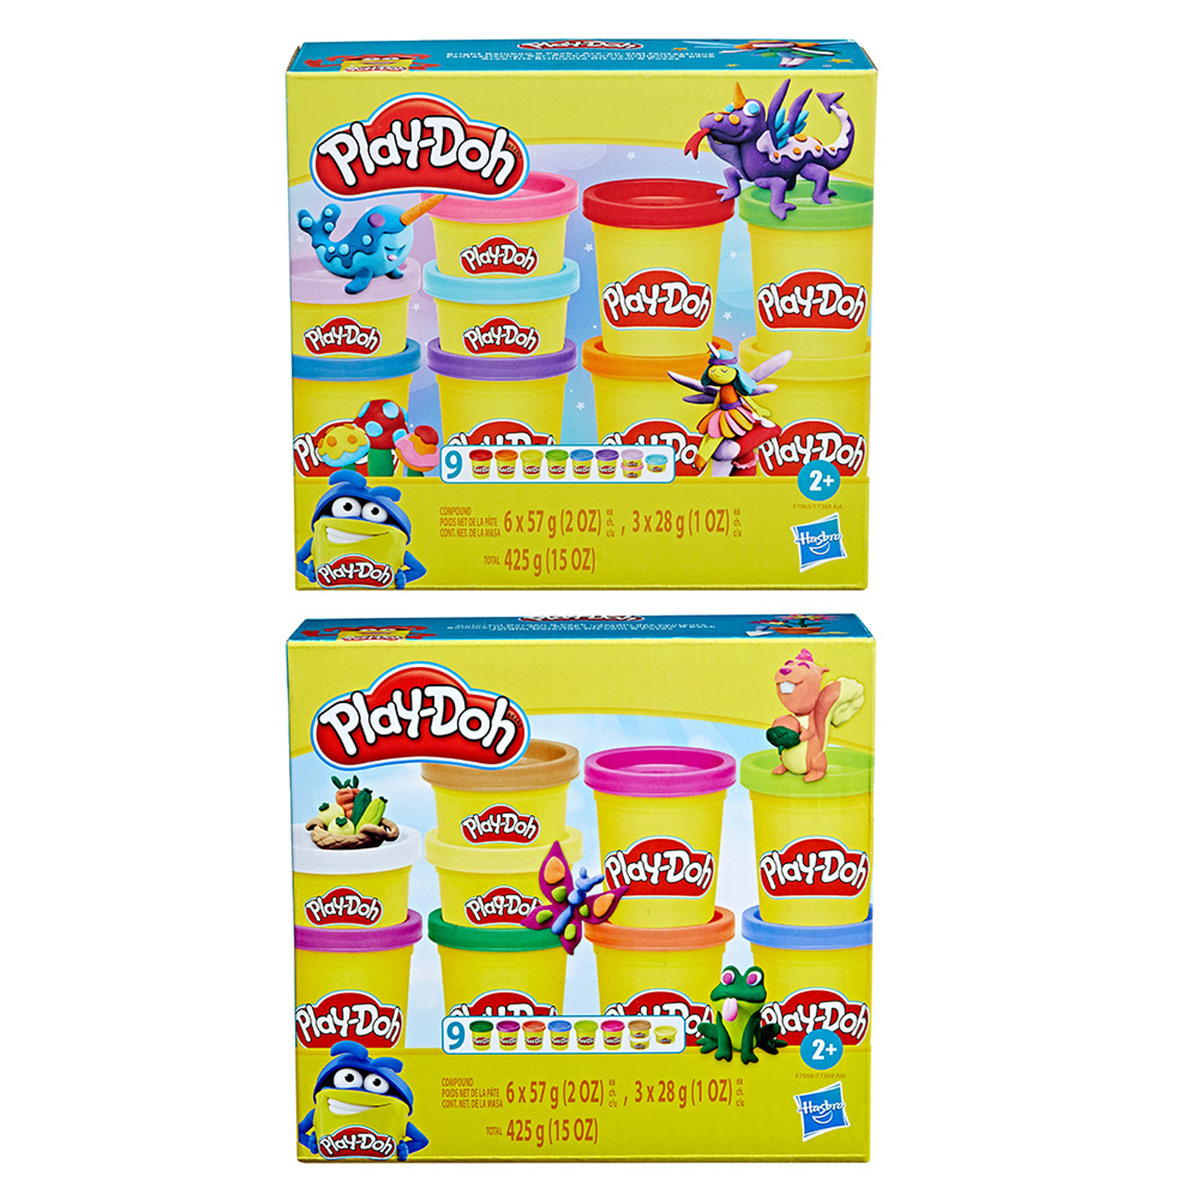 Playdoh Colorful Set Art And Crafts Activity Toy for Kids, F73695L00